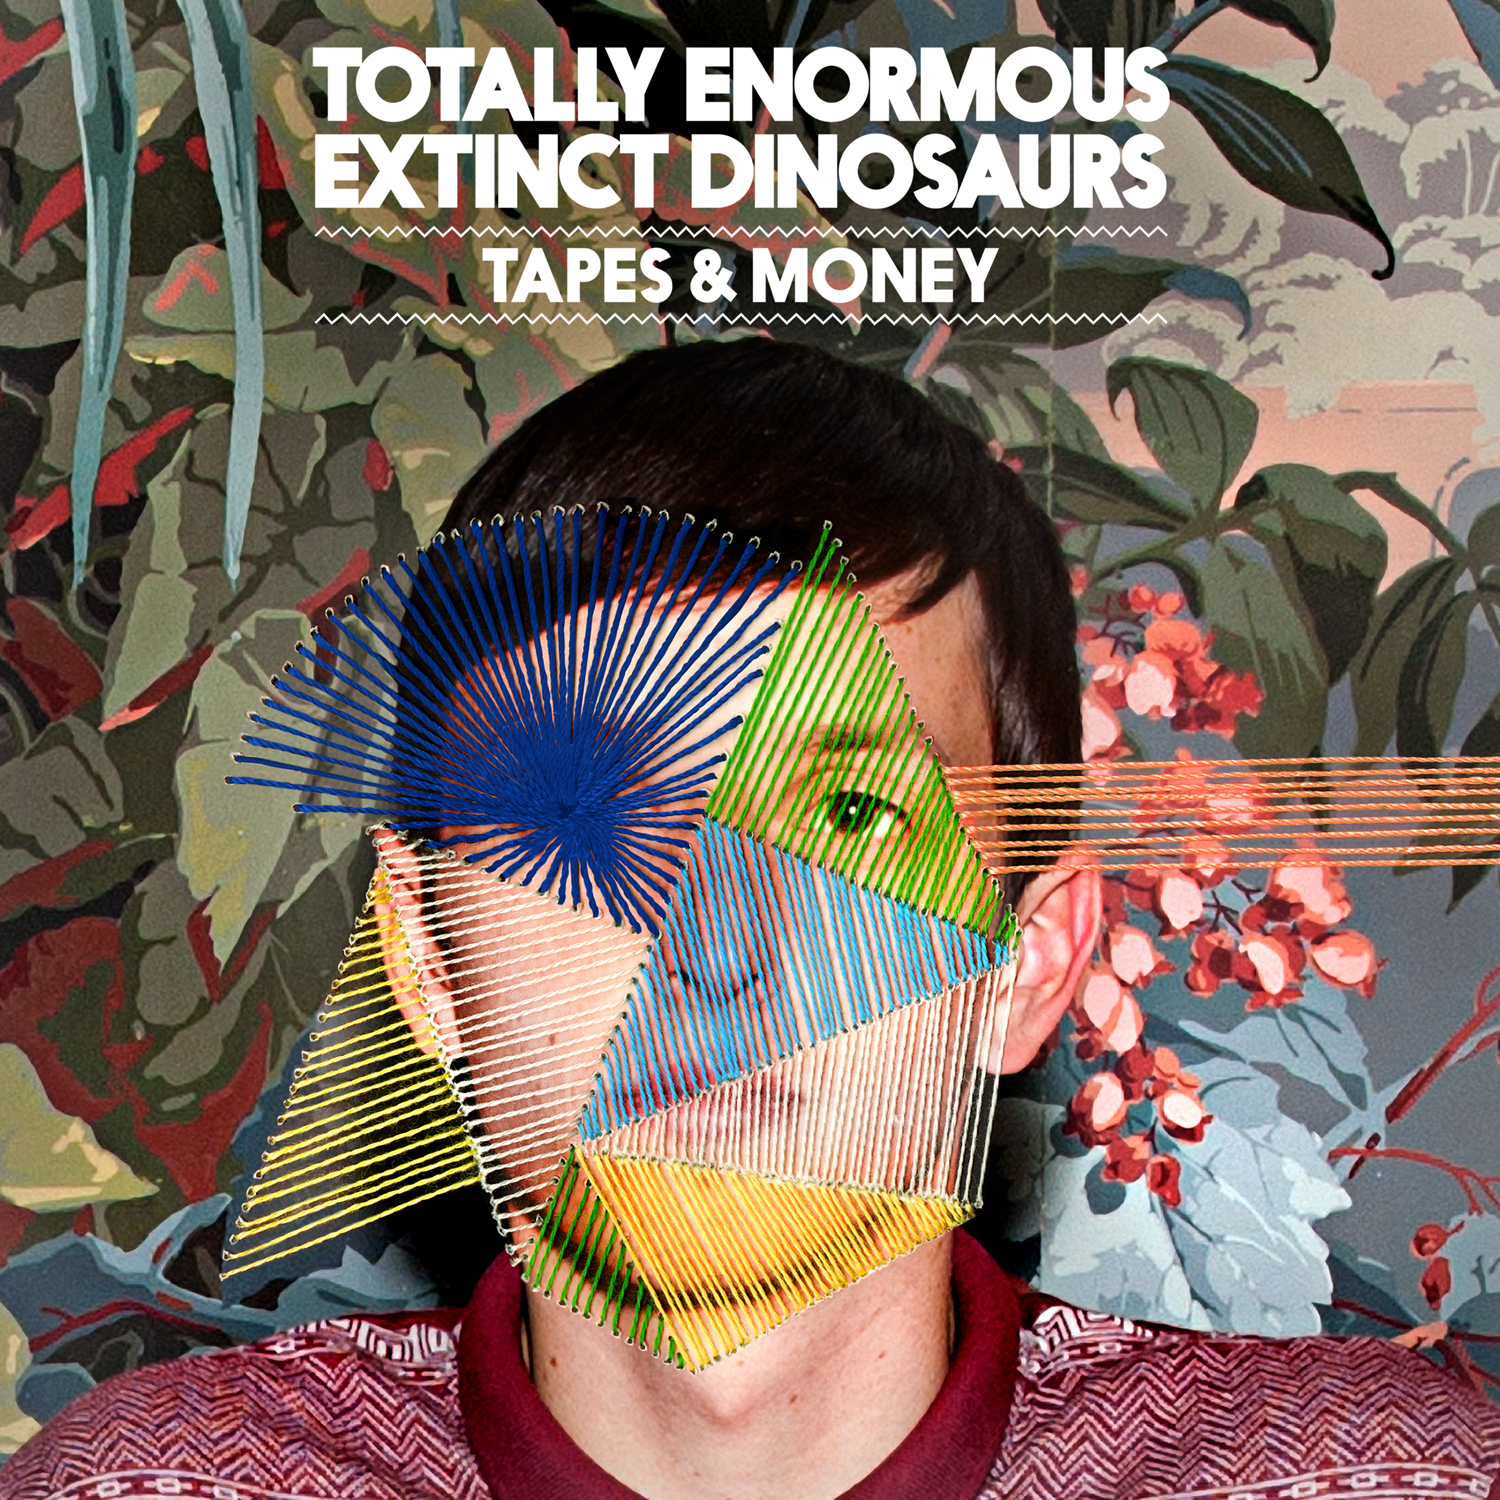 TOTALLY ENORMOUS EXTINCT DINOSAURS: TAPES & MONEY